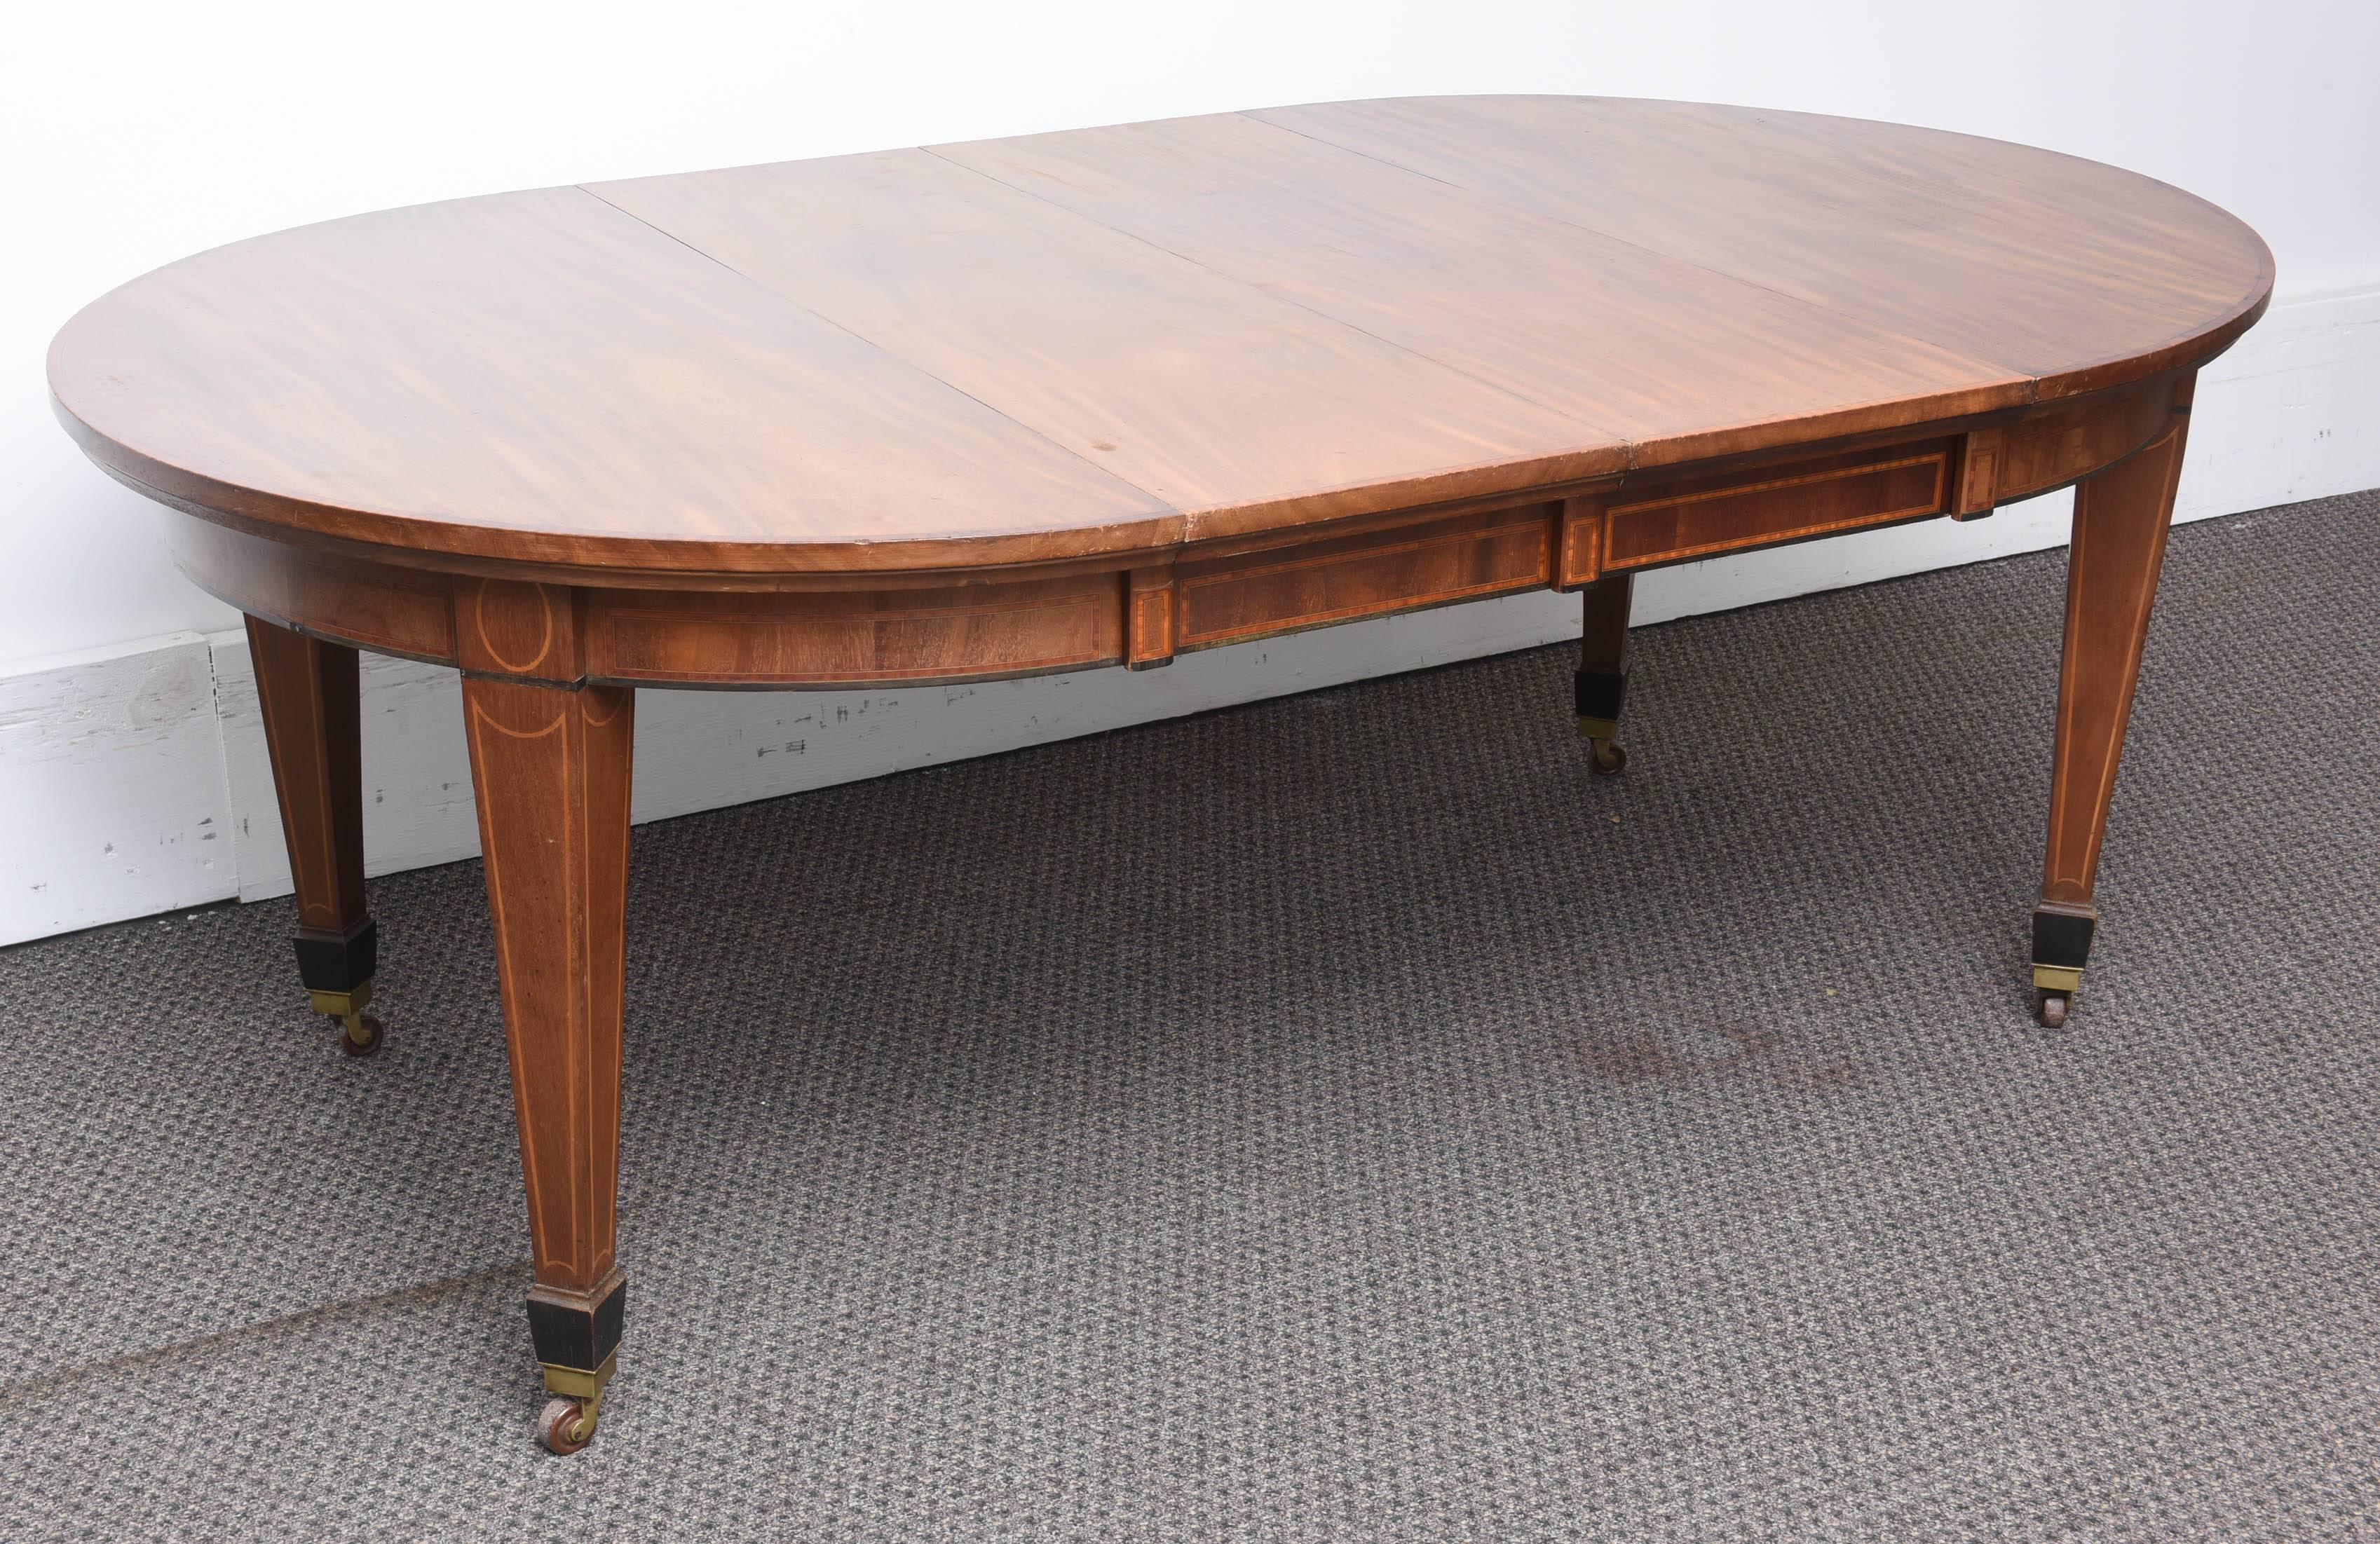 Superb 19th C.Edwardian English Solid Mahogany Round Dining Table with Two Leaf 3